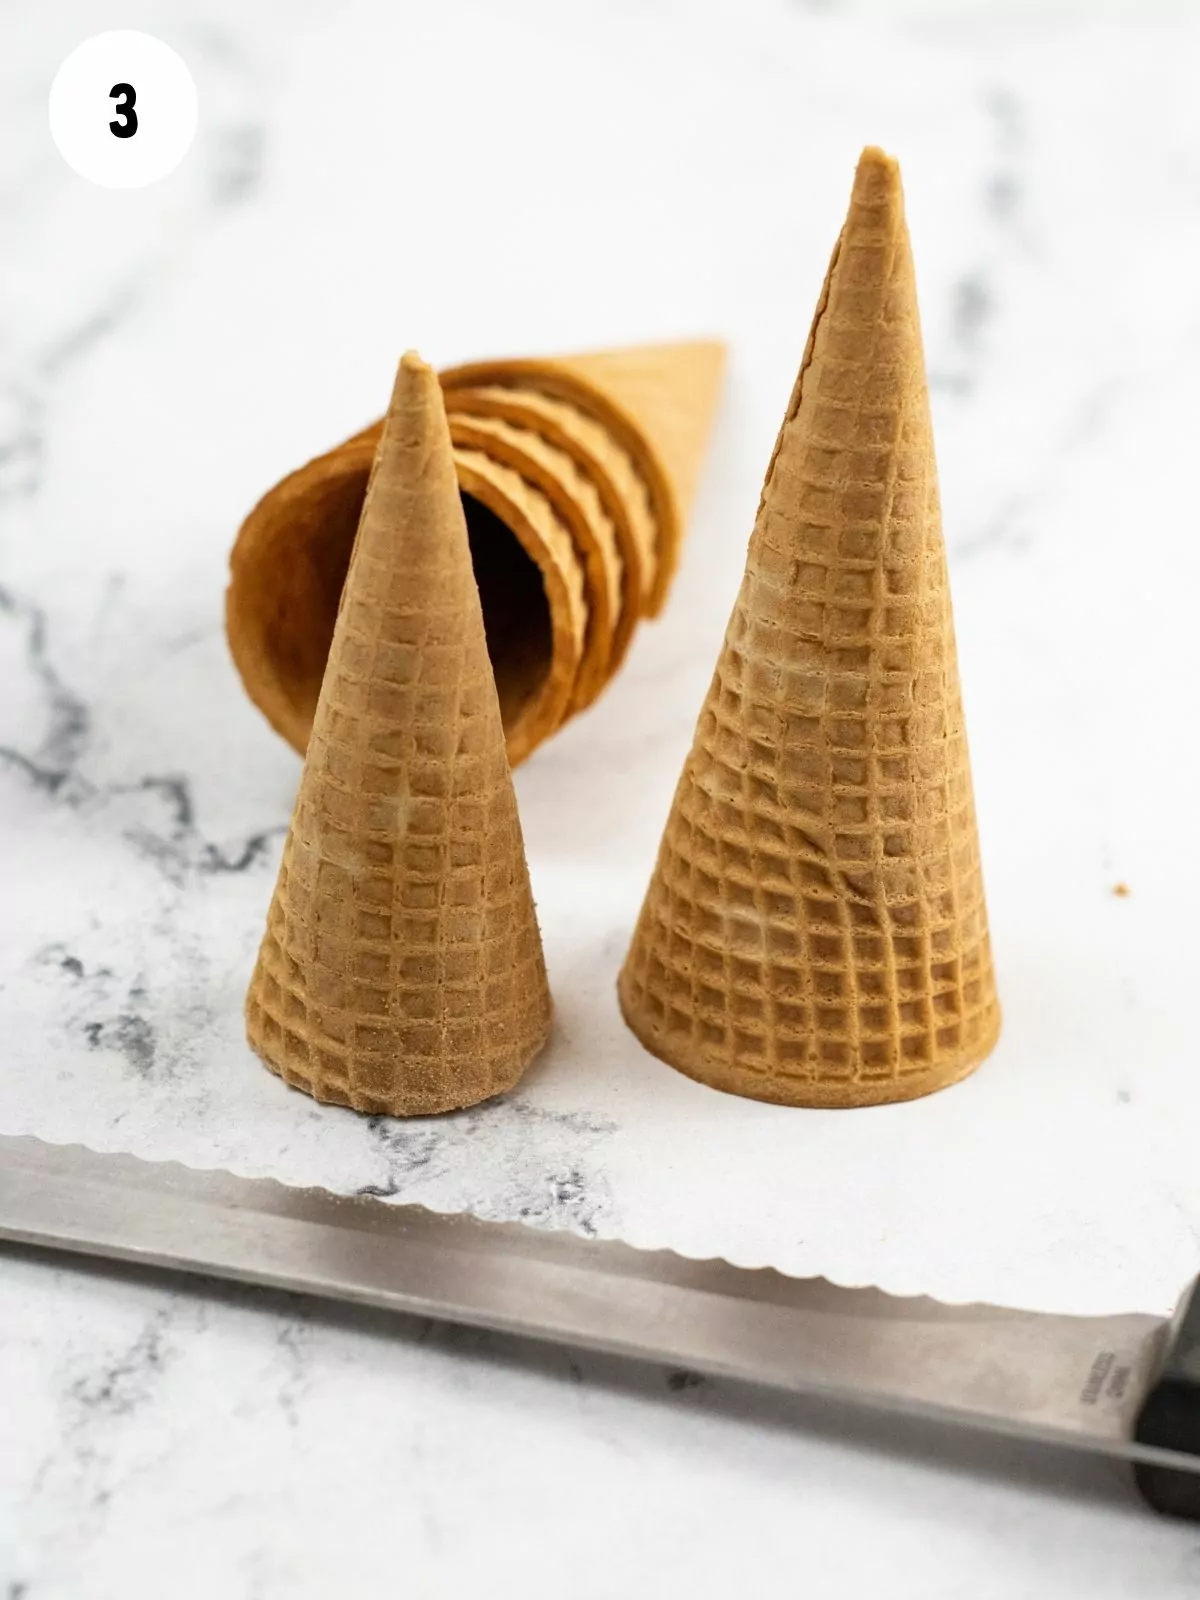 Ice cream cones with serrarted knife.